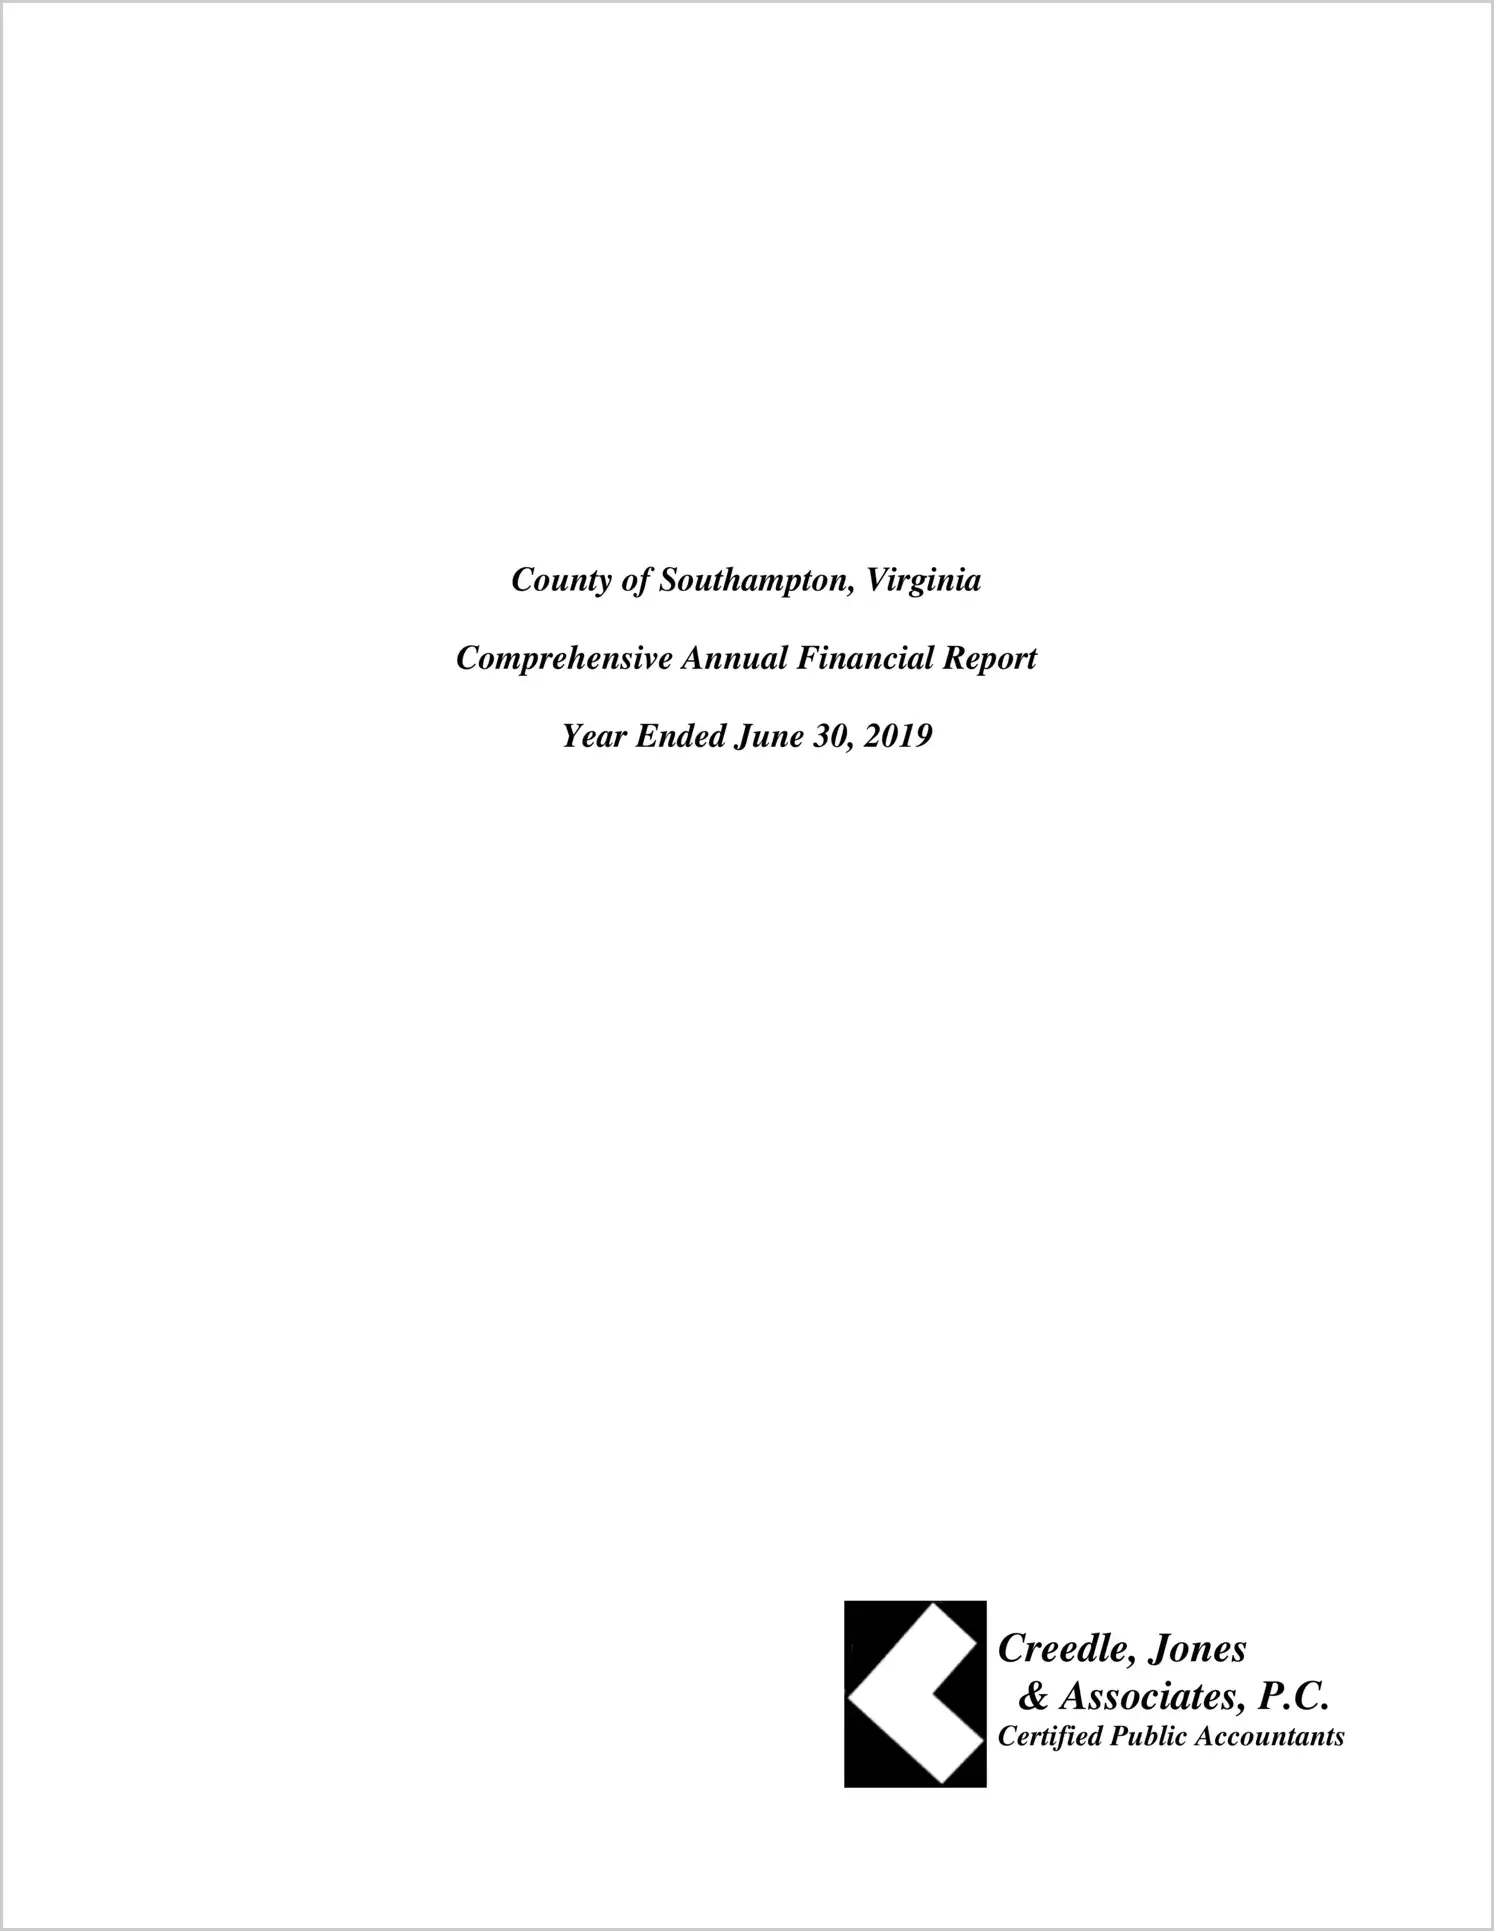 2019 Annual Financial Report for County of Southampton